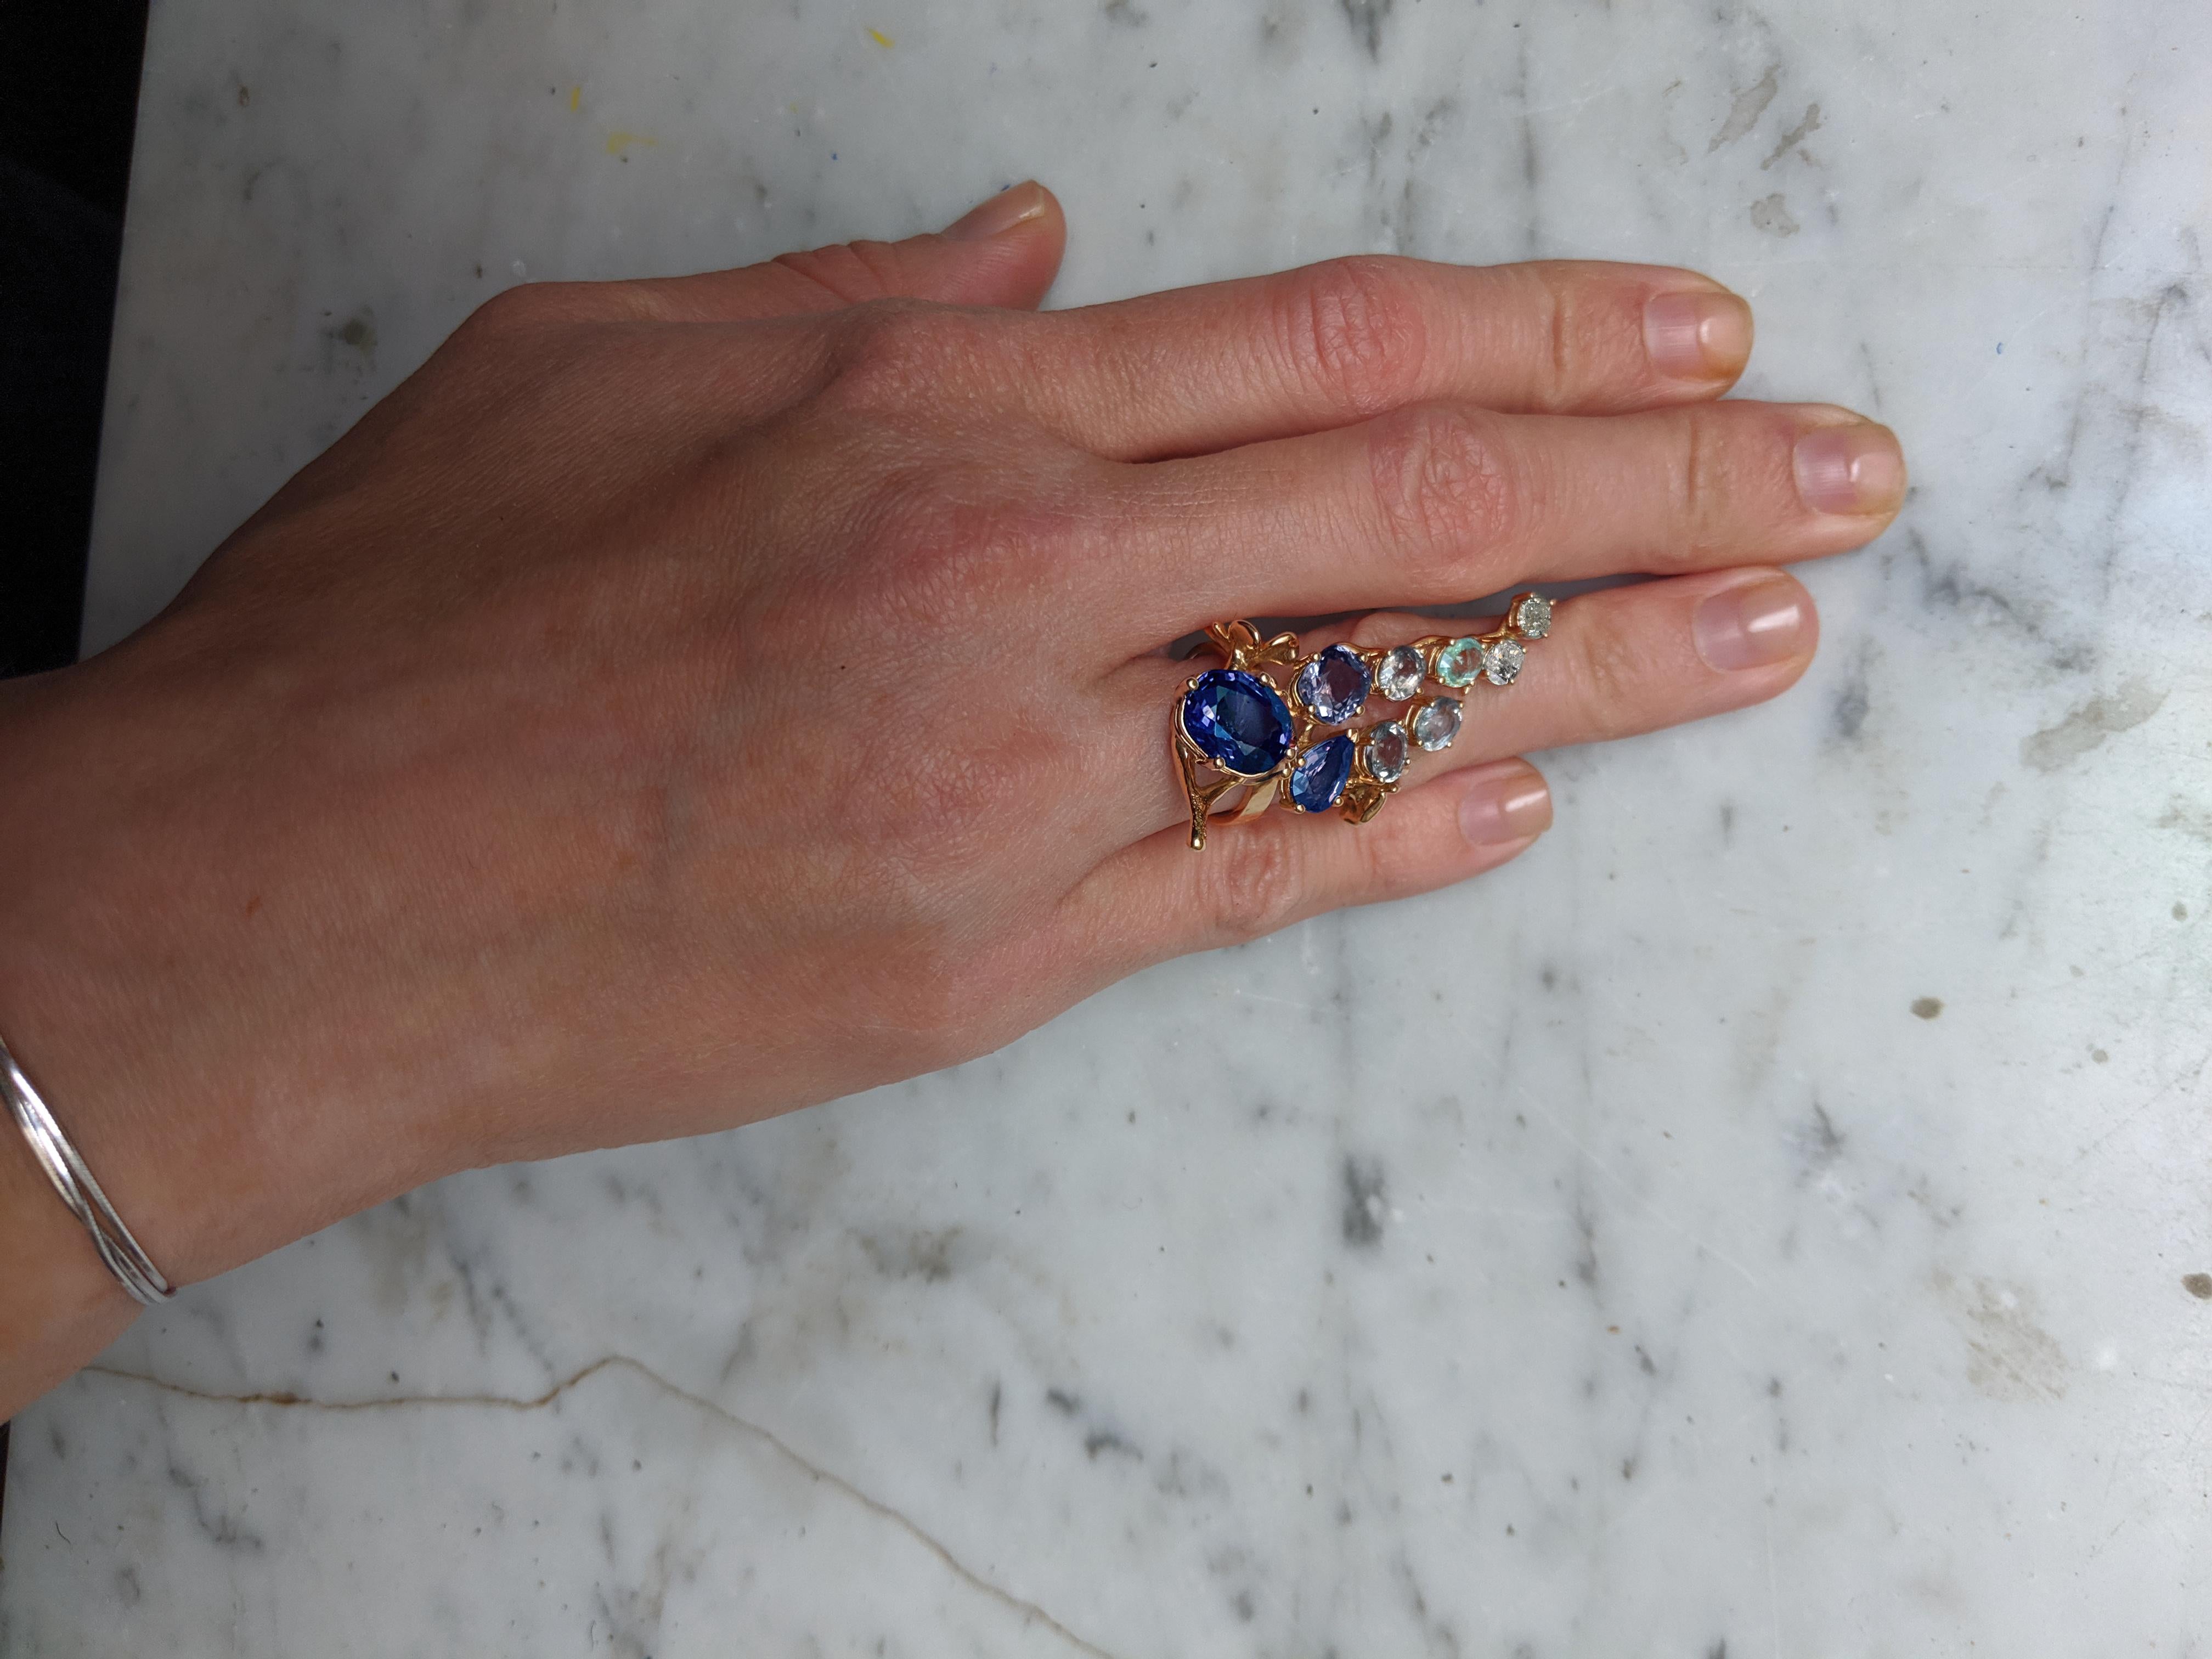 Tobacco Flower ring features a GRS certified vivid royal blue oval sapphire from Sri Lanka, which measures 10.73 x 9.64 x 5.99 mm and weighs 6.08 carats. The sapphire has not been heat treated. The ring is a work of art, designed by painter and 3D